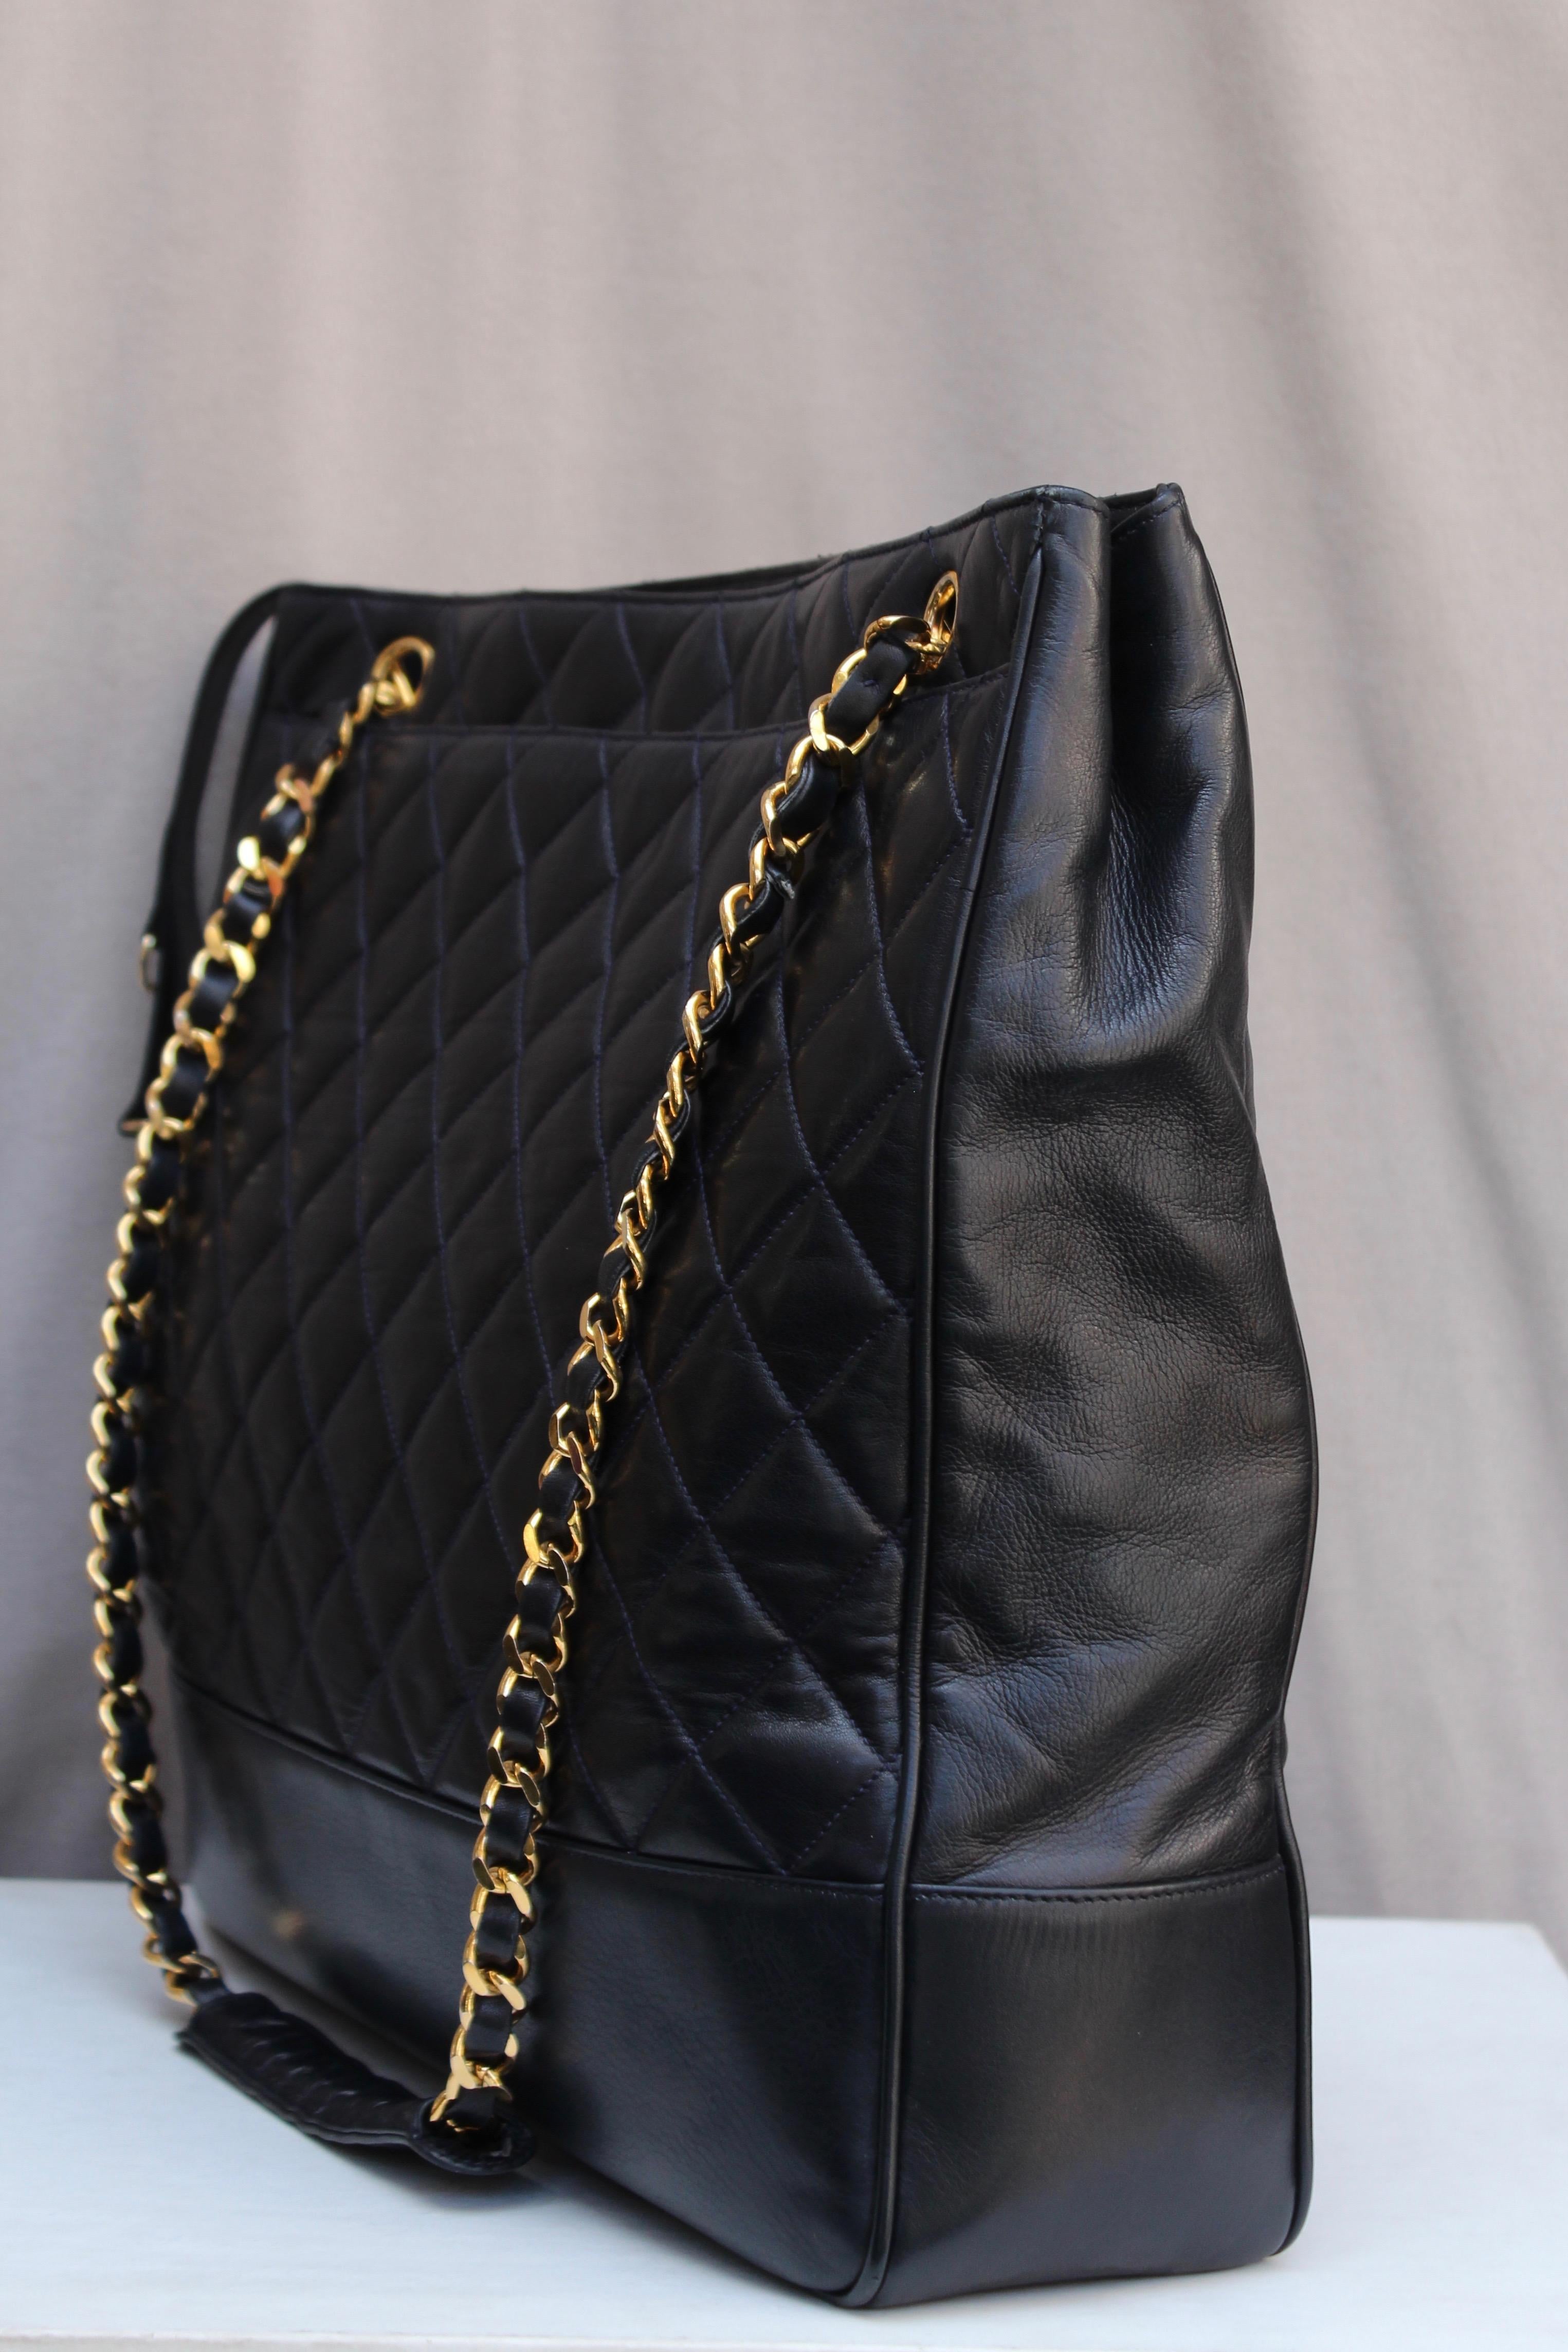 Black Chanel large black quilted leather bag, 1990’s